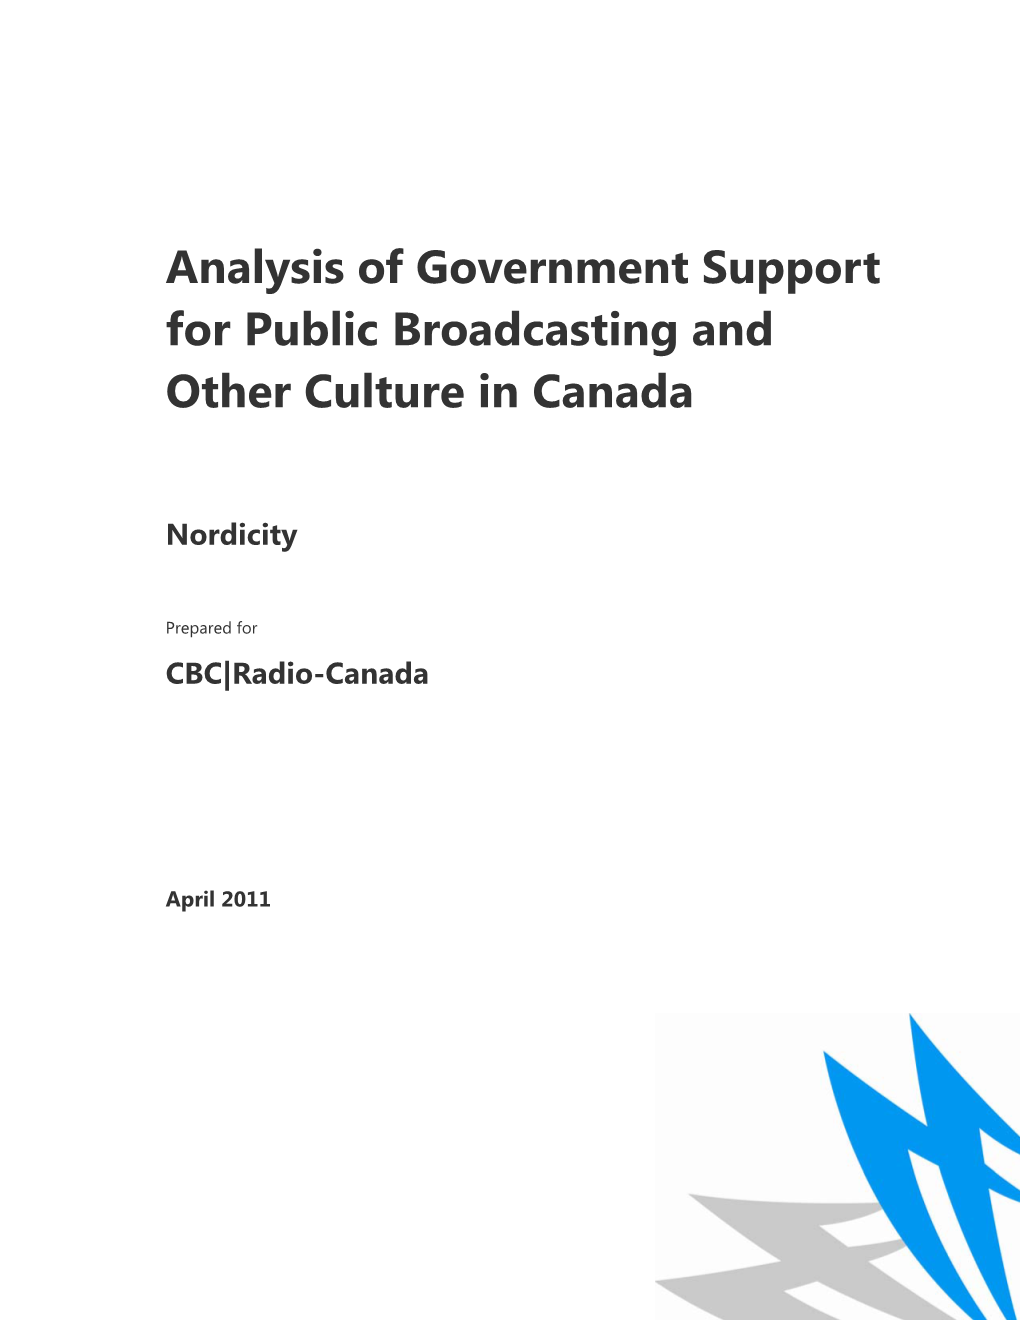 Analysis of Government Support for Public Broadcasting and Other Culture in Canada